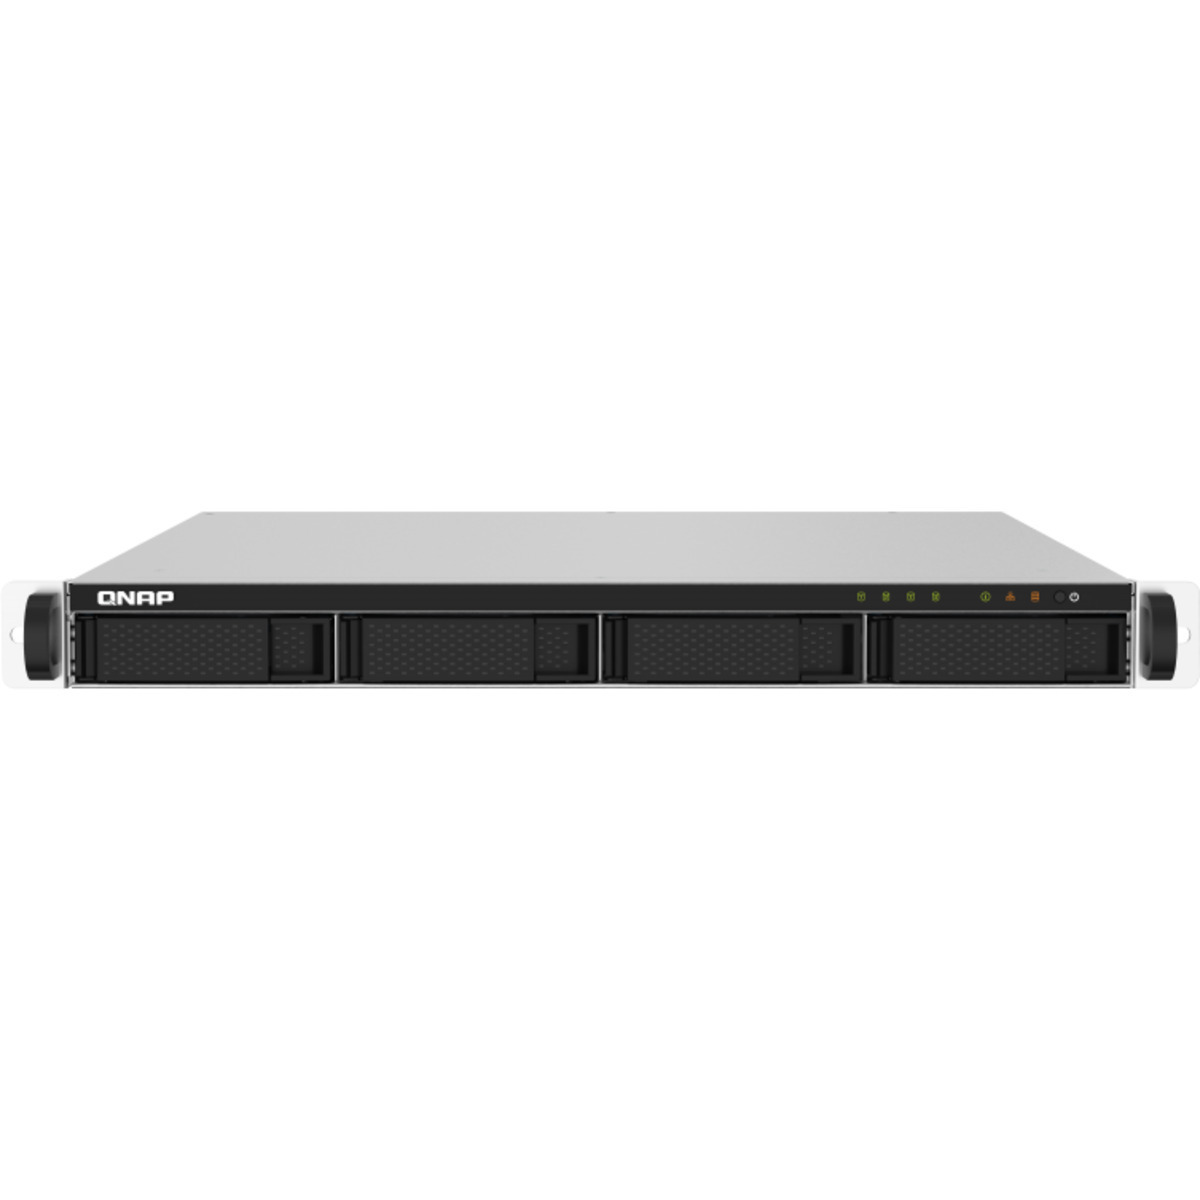 QNAP TS-432PXU 30tb 4-Bay RackMount Personal / Basic Home / Small Office NAS - Network Attached Storage Device 3x10tb Seagate IronWolf Pro ST10000NT001 3.5 7200rpm SATA 6Gb/s HDD NAS Class Drives Installed - Burn-In Tested - ON SALE - FREE RAM UPGRADE TS-432PXU